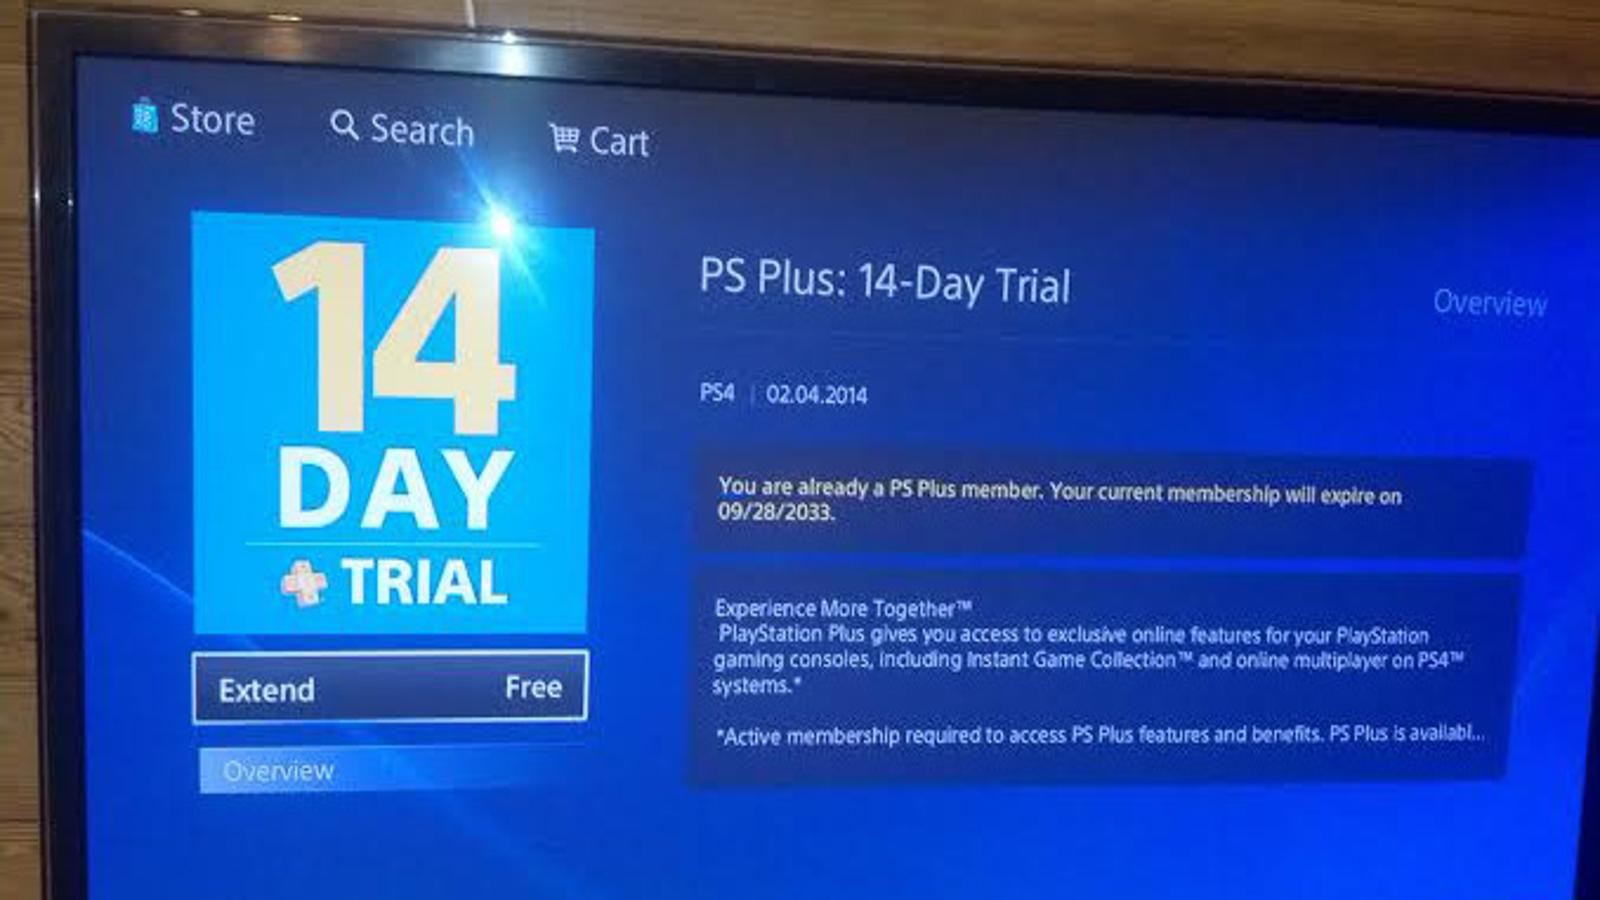 5 free Online PS4 games that do not require PS Plus membership